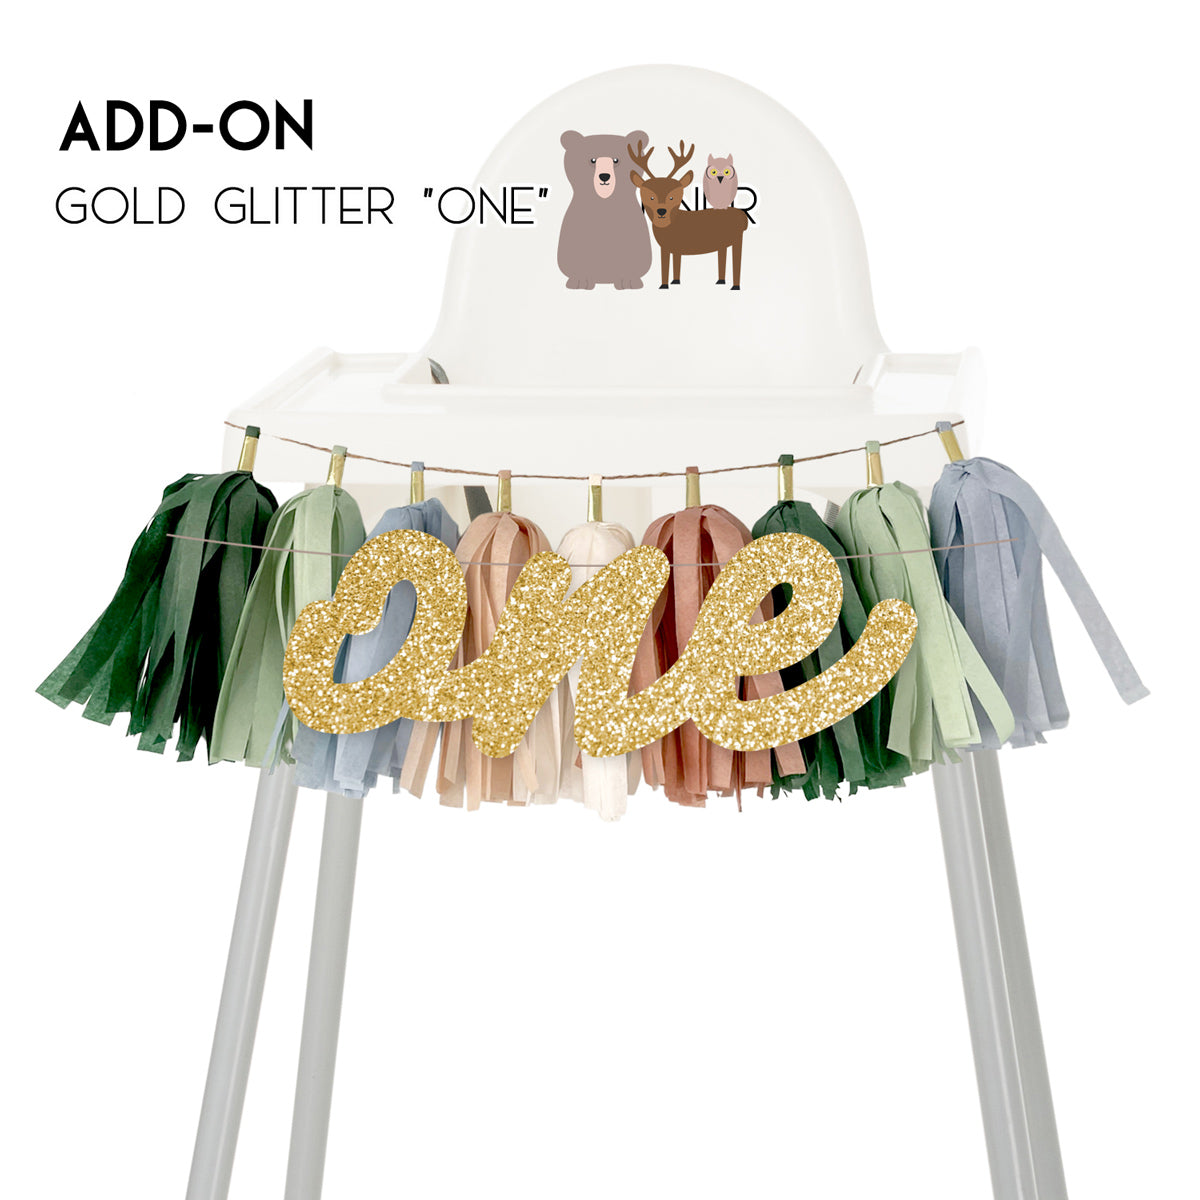 Woodland High Chair Garland - Woodland Animal Party Natural Outdoor Themed 1st Birthday Decoration for Baby Boy